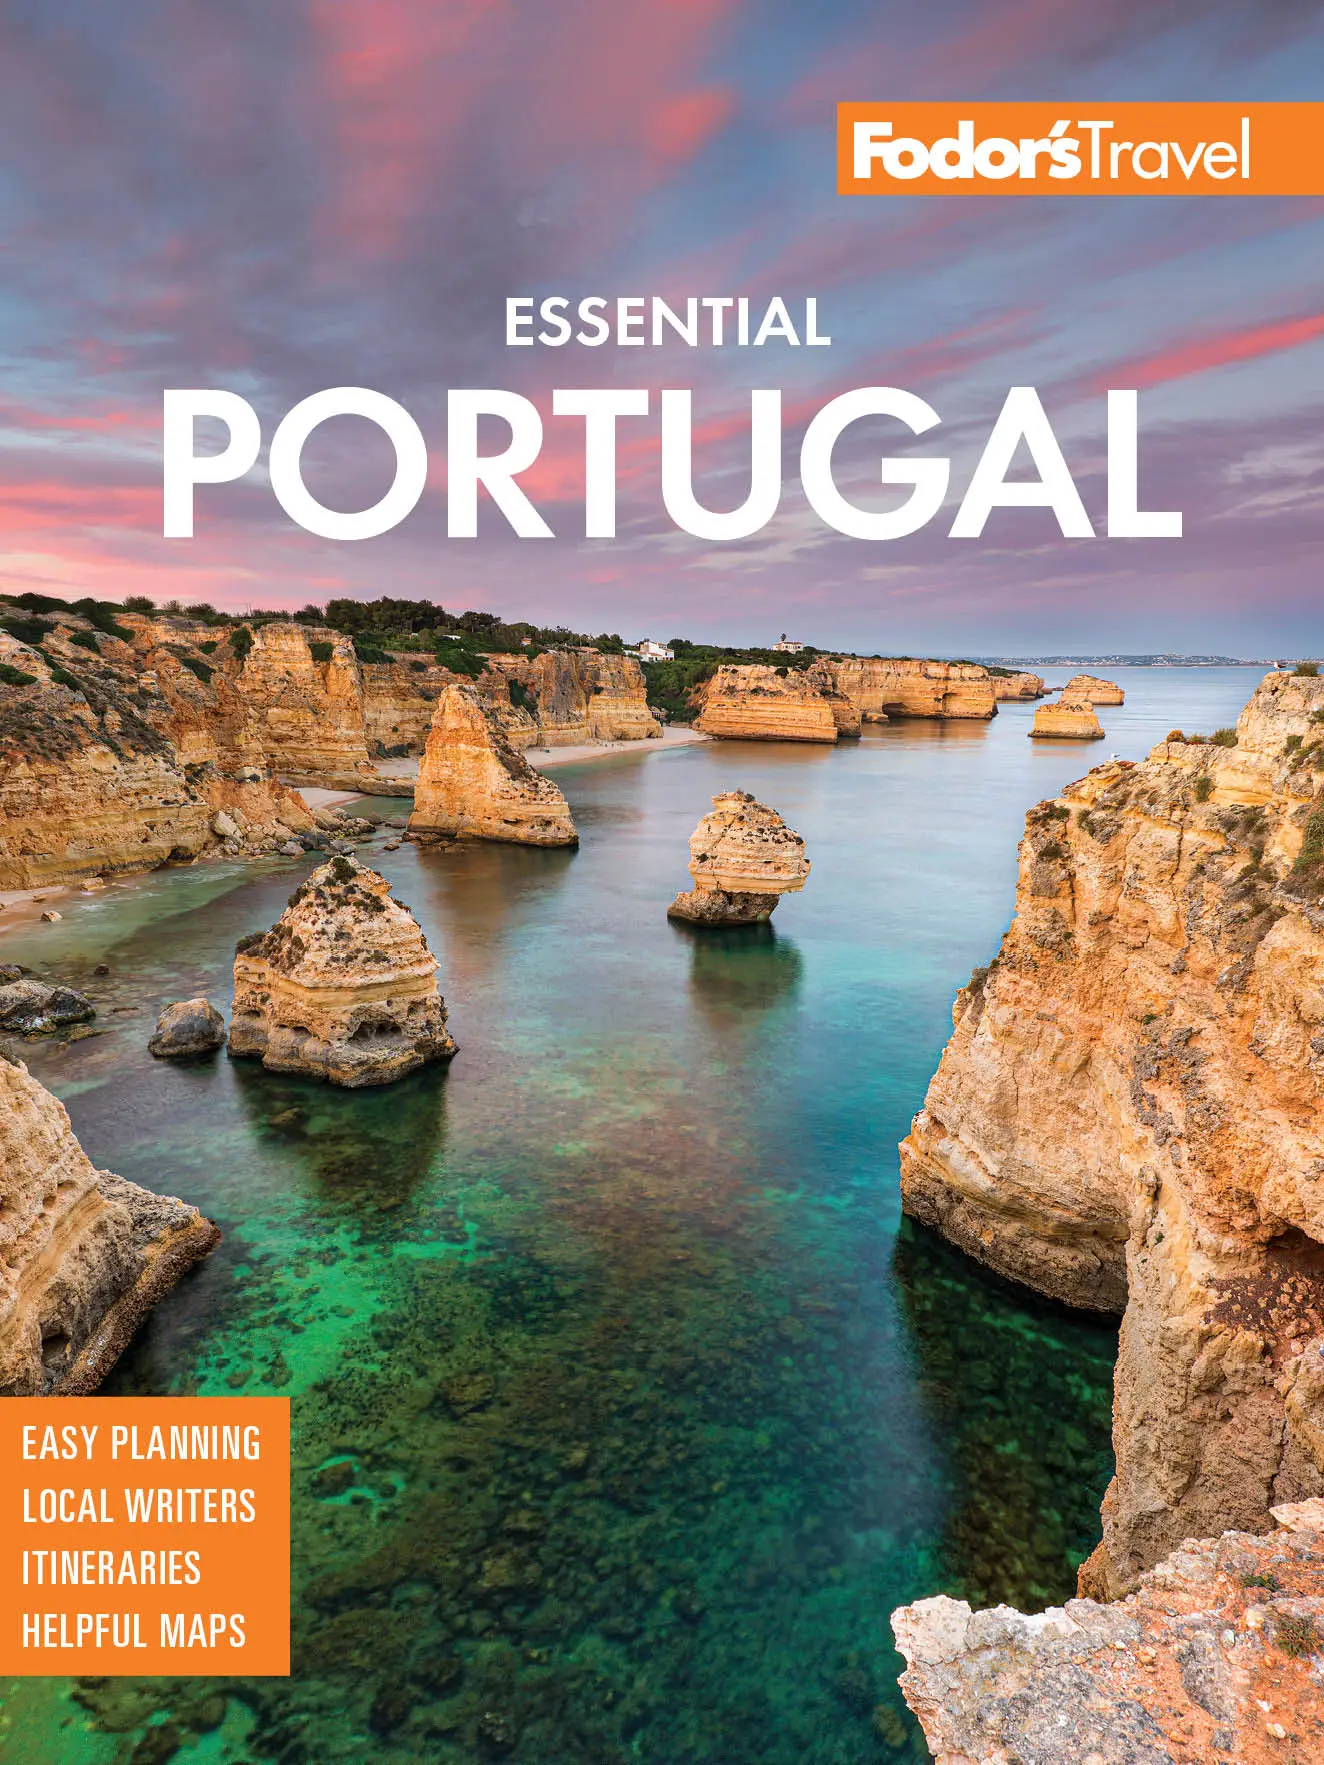 fodors travel guide portugal